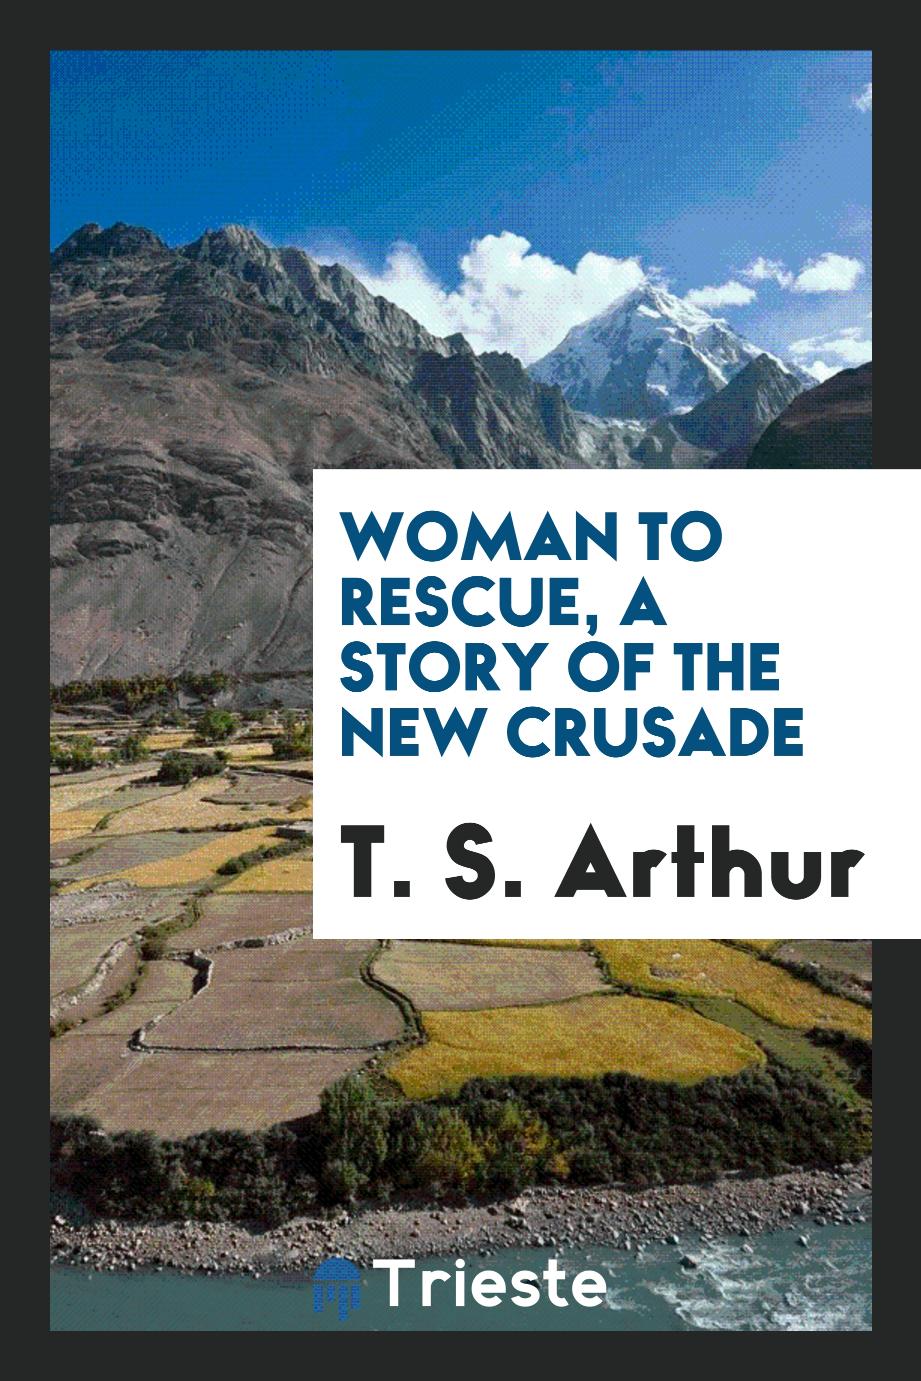 Woman to rescue, a story of the new crusade